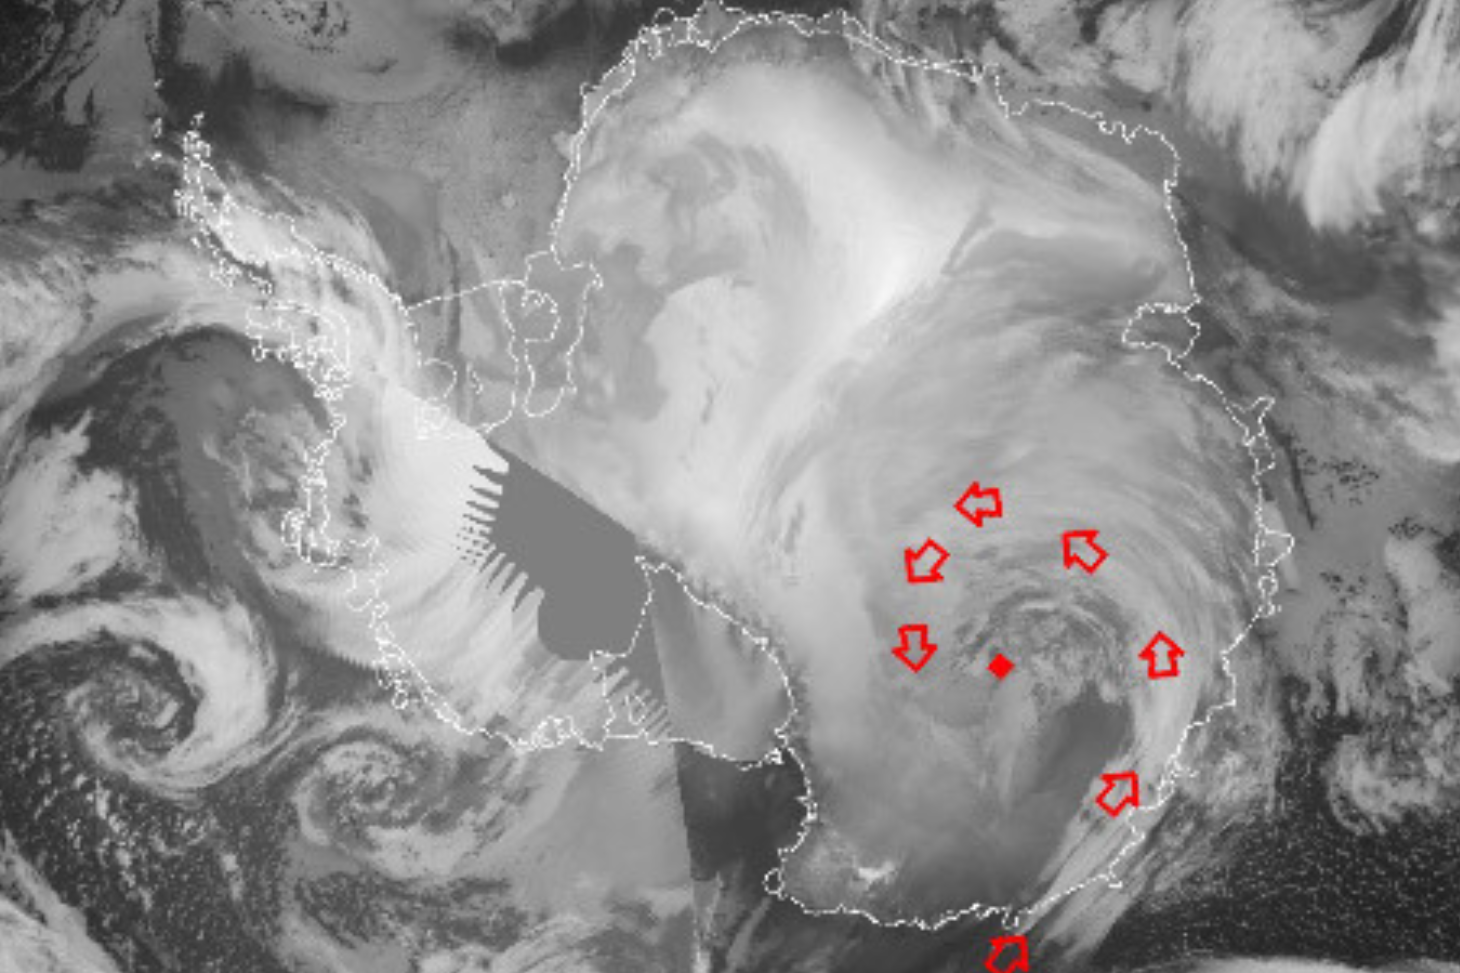 The state of the cloud mass associated with the ending phase of the atmospheric river is depicted here in this 23 UTC 18 March 2022 infrared composite satellite image. The flow of the clouds is highlighted with the red arrows.